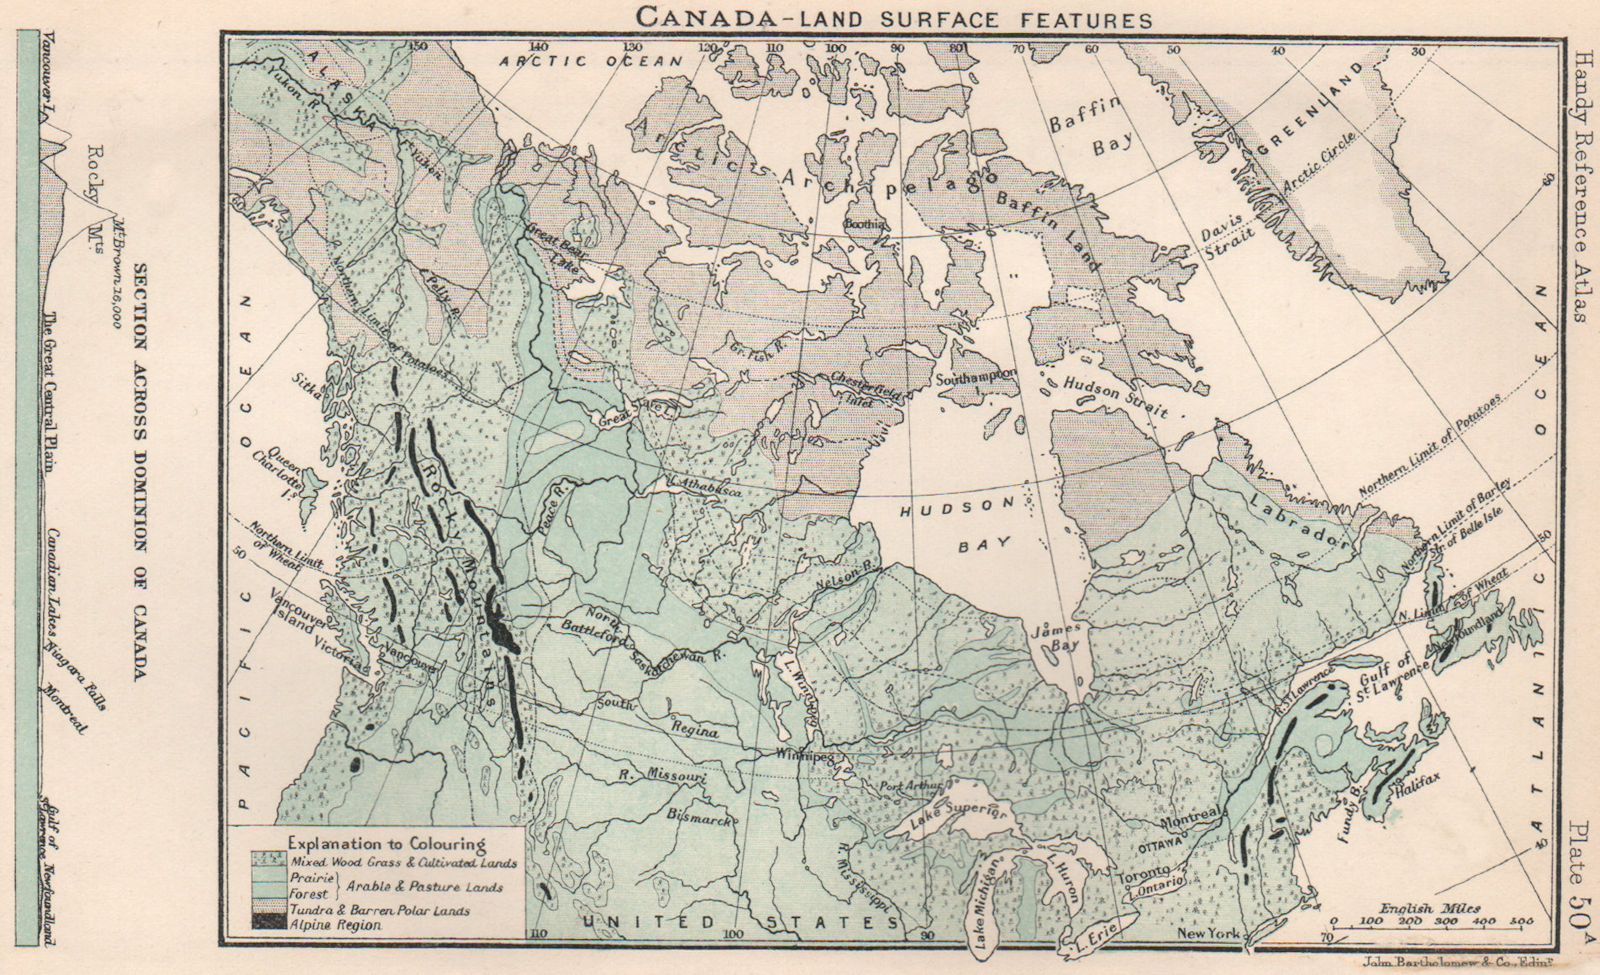 Canada - Land Surface Features. Section across Canada. BARTHOLOMEW 1904 map